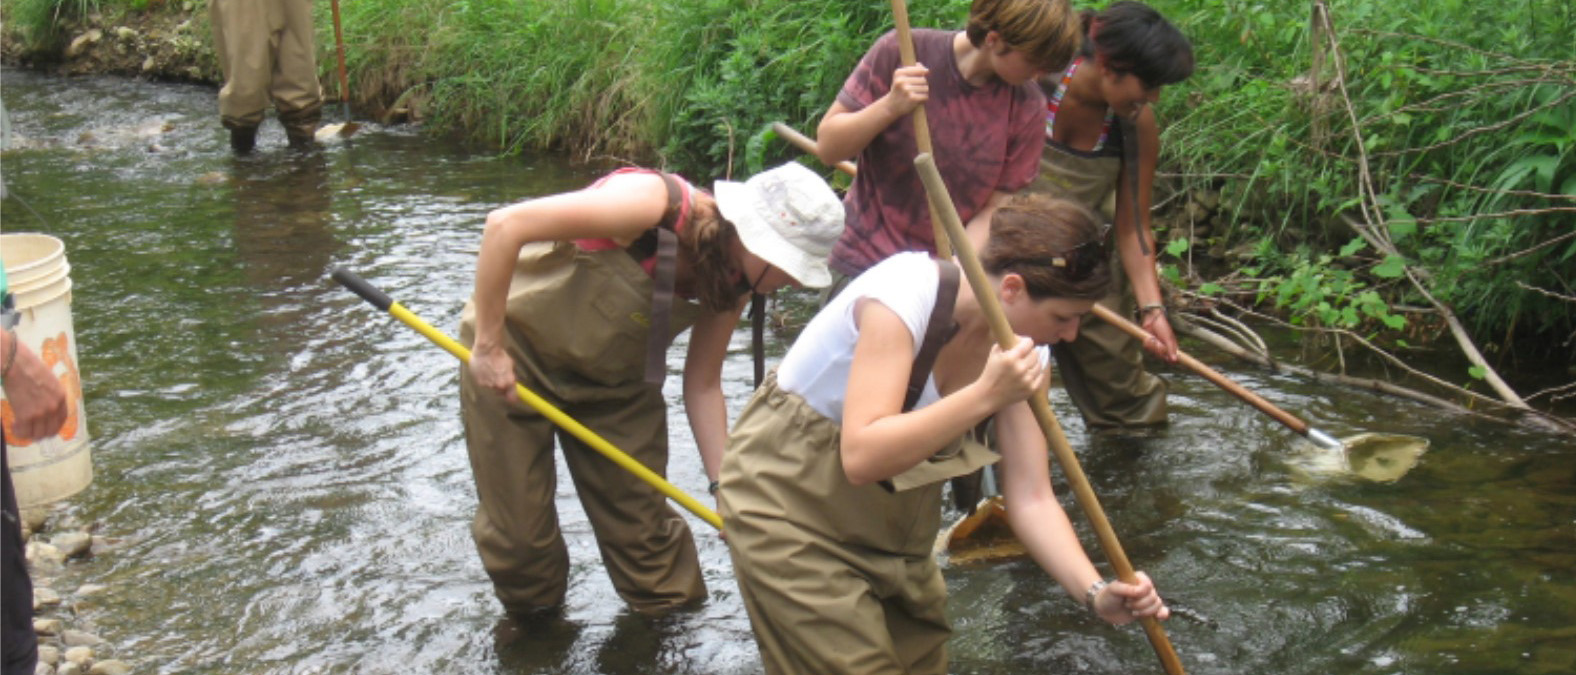 Students with waders standing in the river with sticks in the water